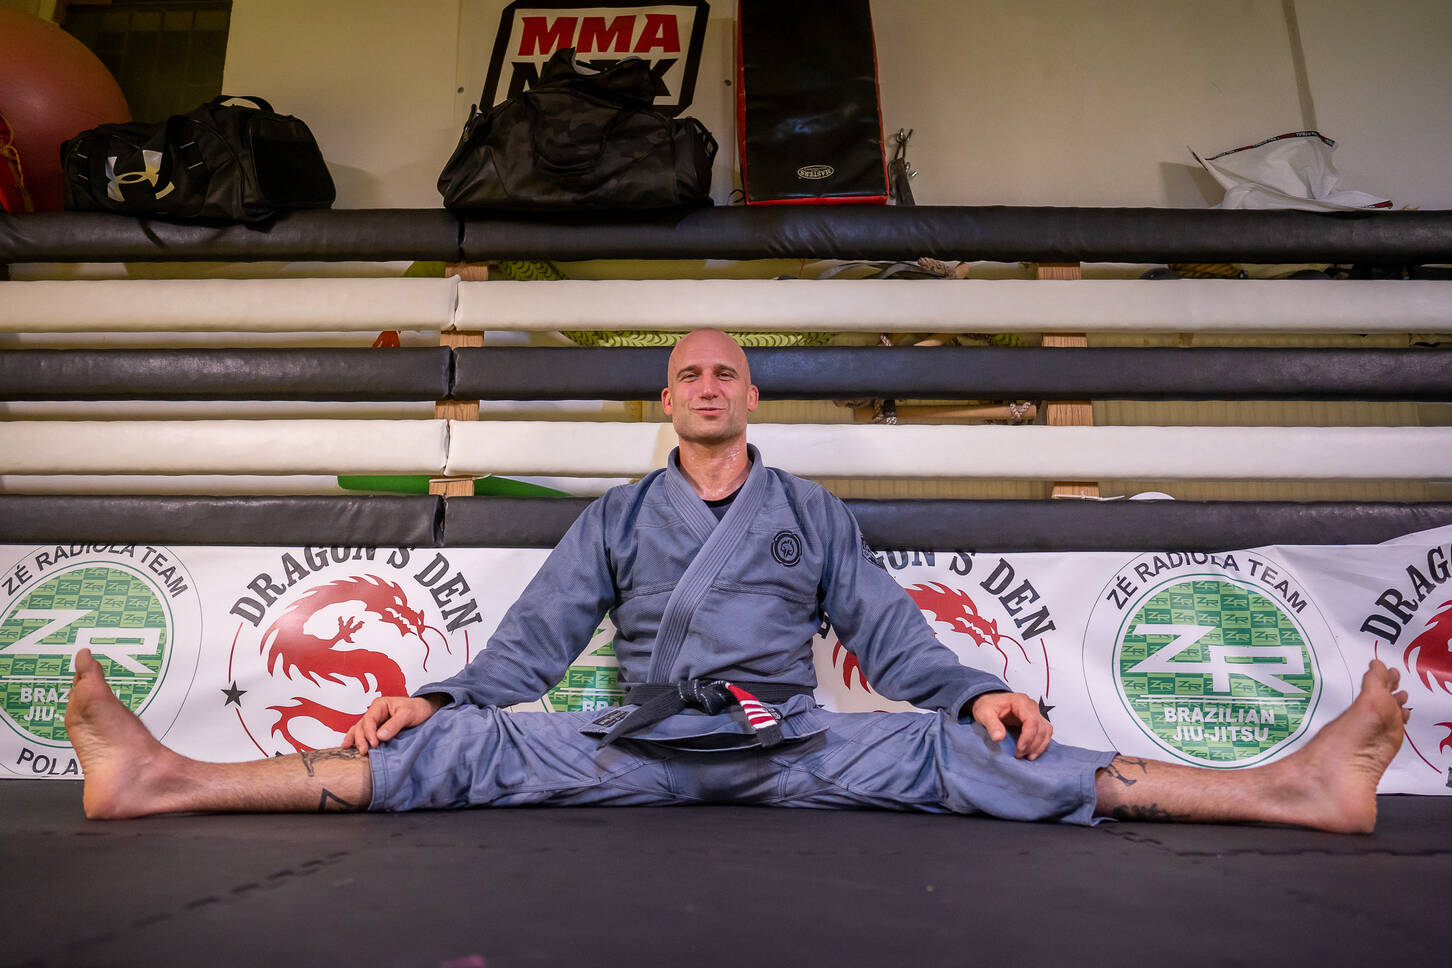 BJJ team seating at the platform holding medals and trophies